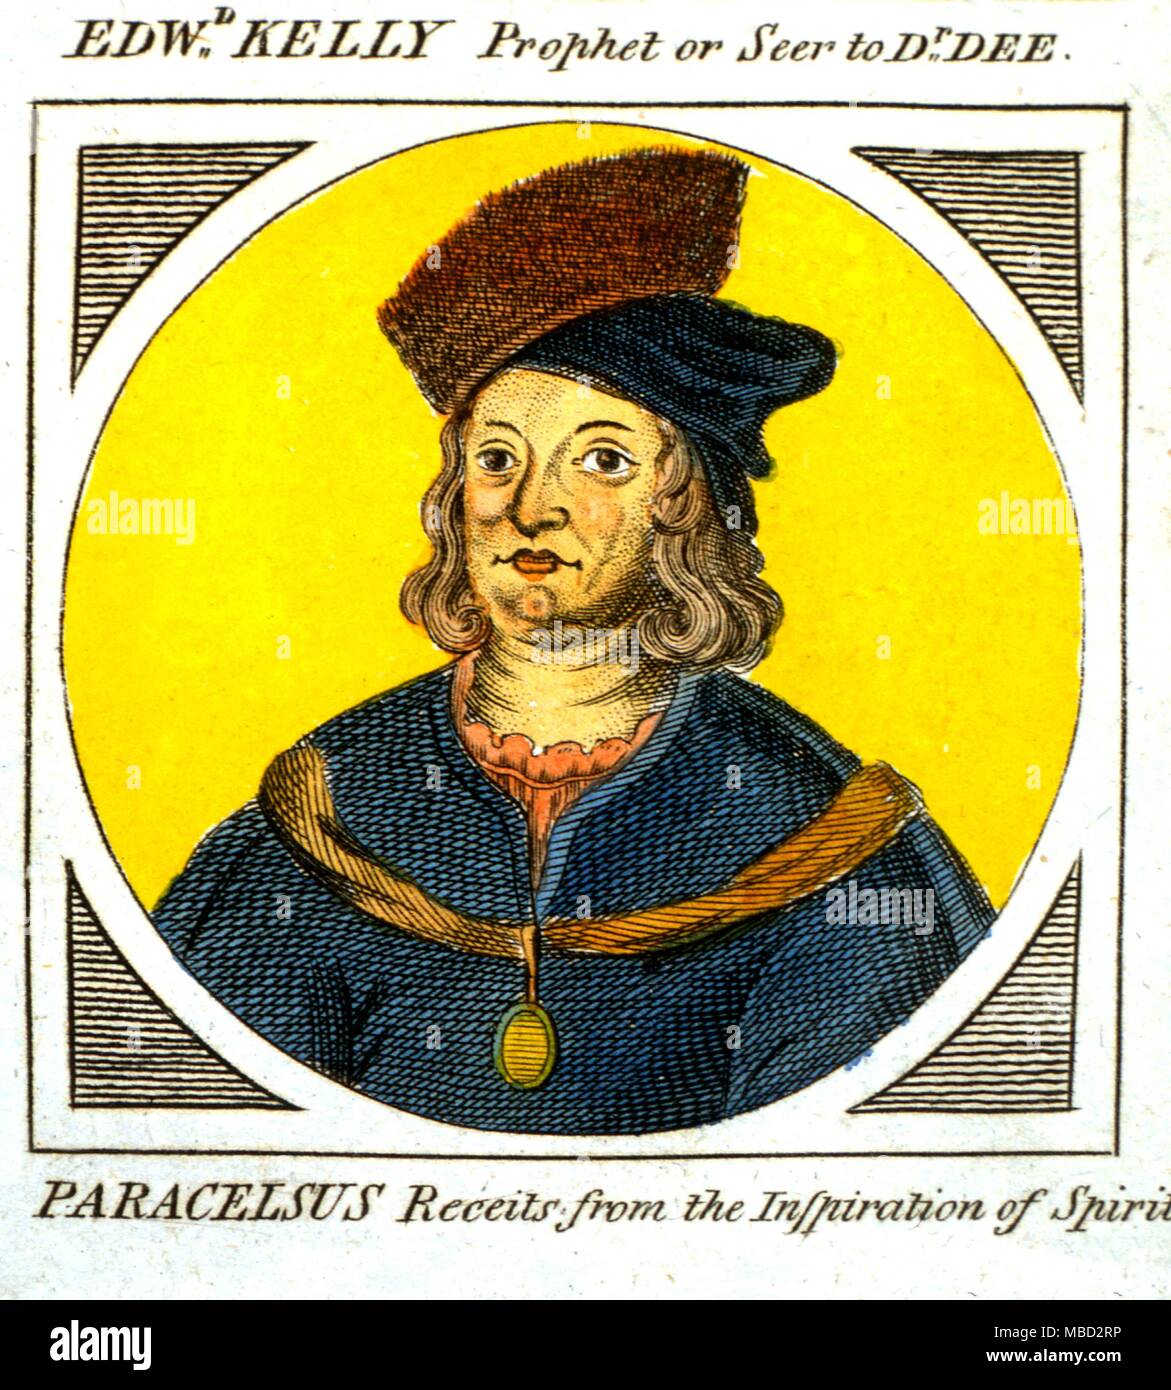 Occultists - Paracelsus portrait (Theophrastus Bombast von Hohenheim) 1493-1541, the most influential of 16th century occultists. From the 1790 engraving in Sibly's Illustration of the Occult Arts. - © / CW Stock Photo